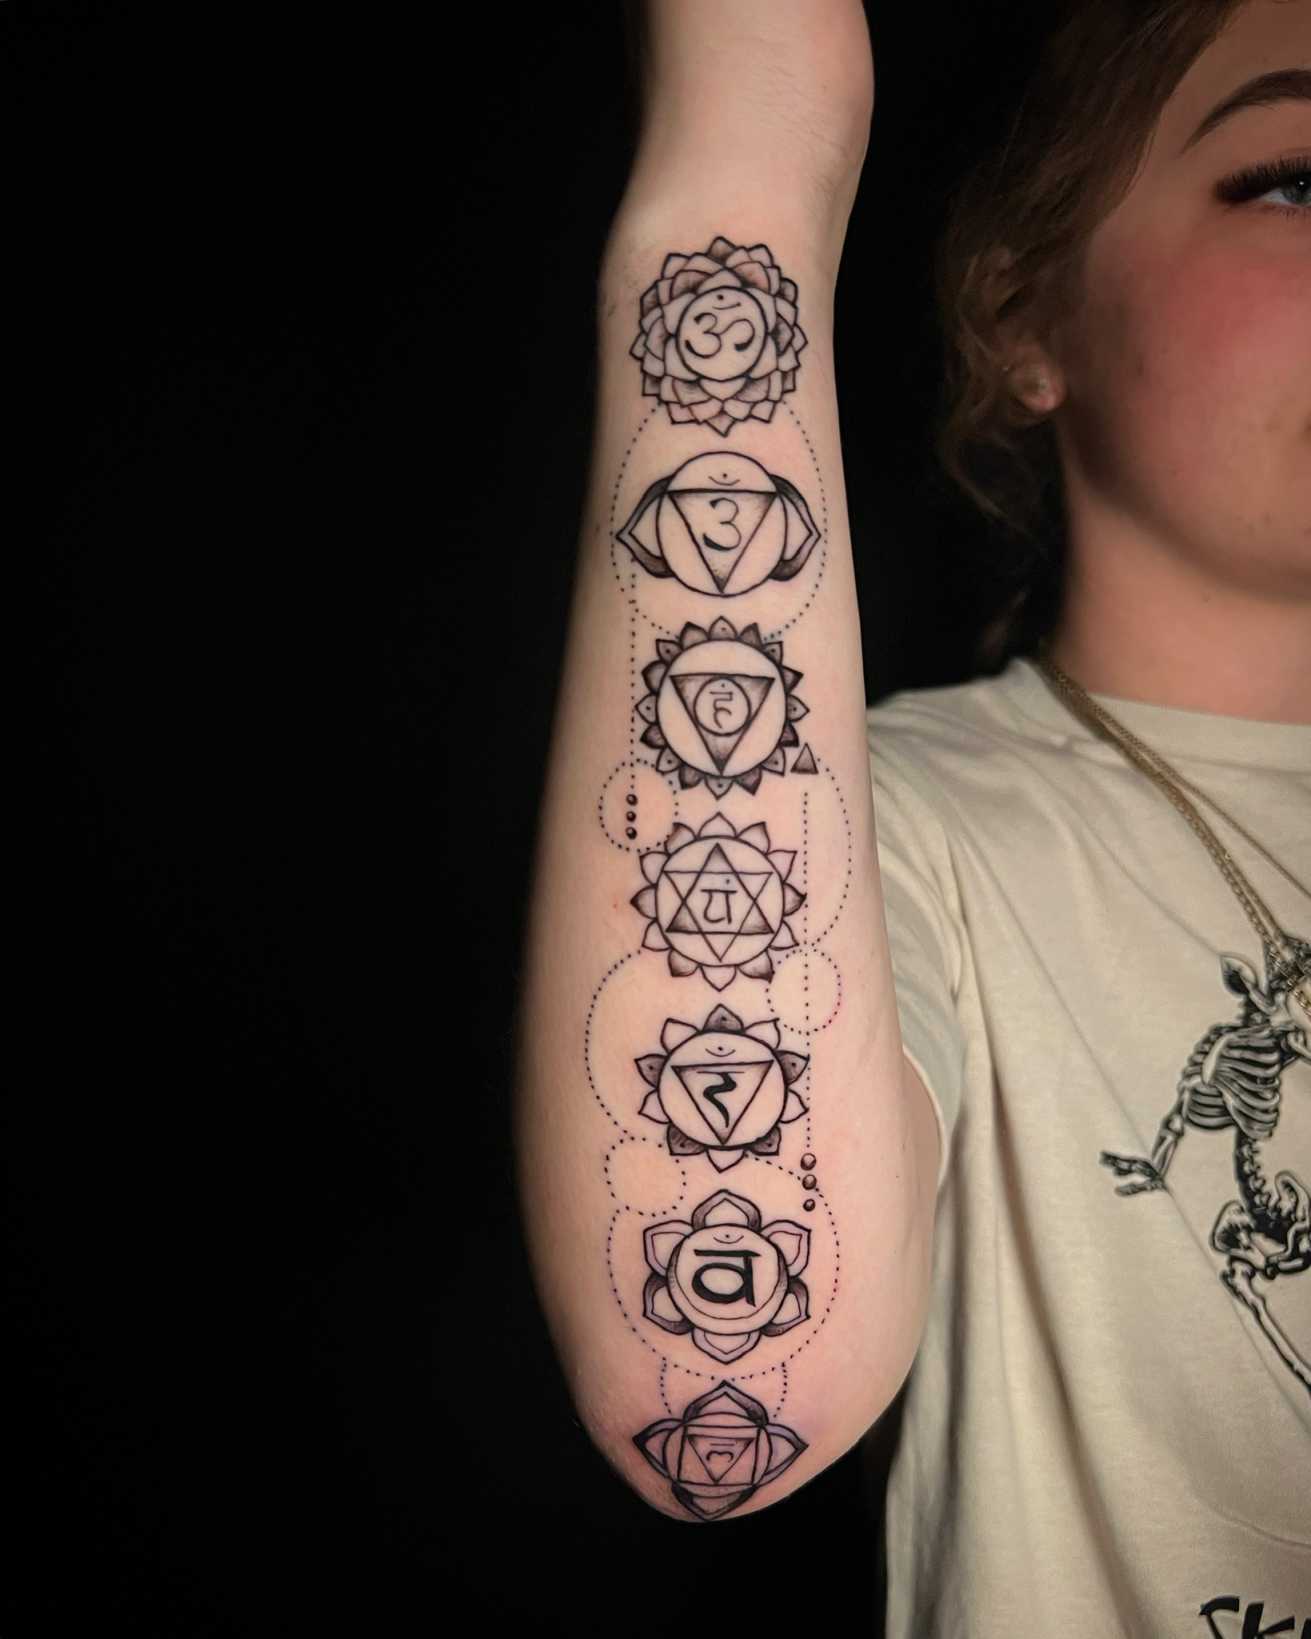 Top Tattoos for The Spiritual Soul (and their meanings) – Xclusive